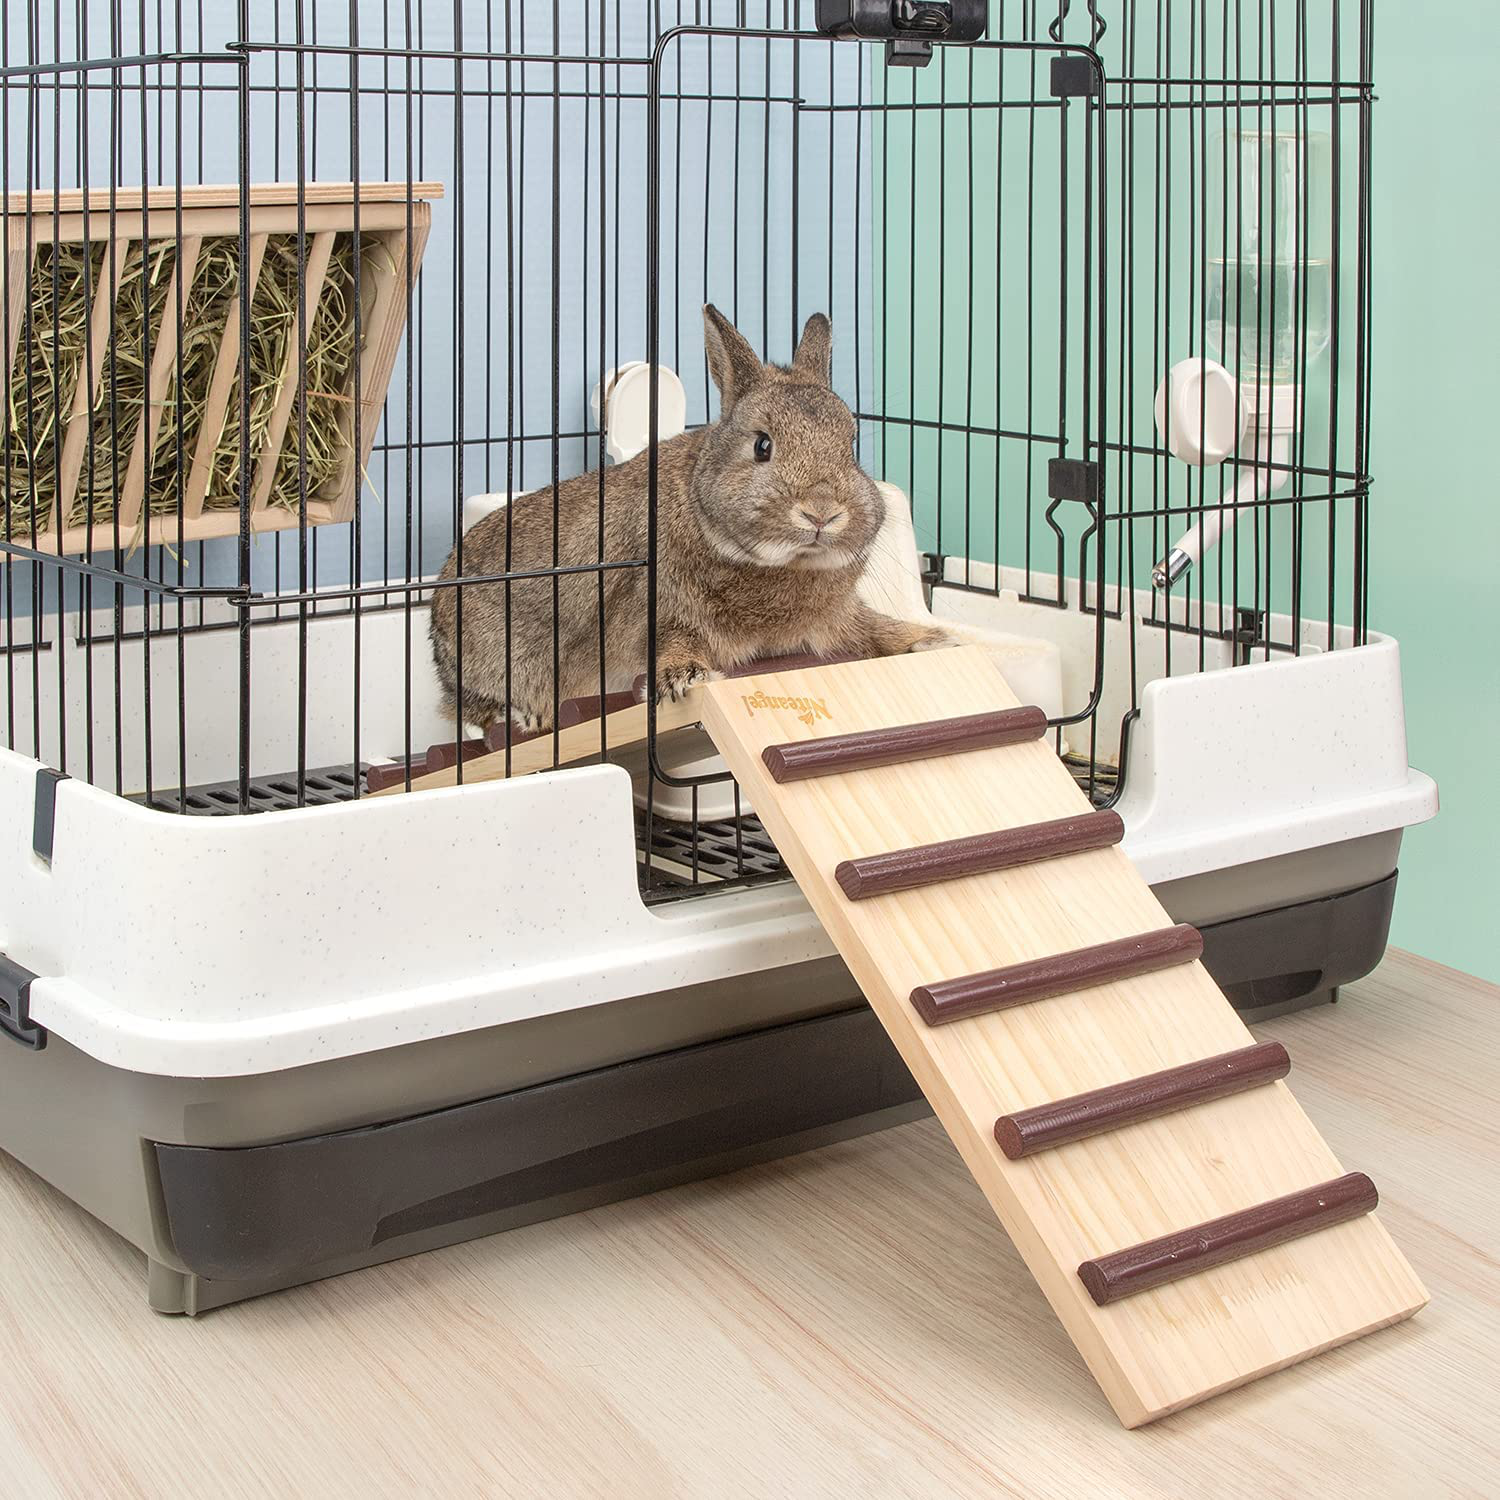 Niteangel Wooden Cage Bridge for Rabbits, Guinea Pigs and Chinchilla, Large Size